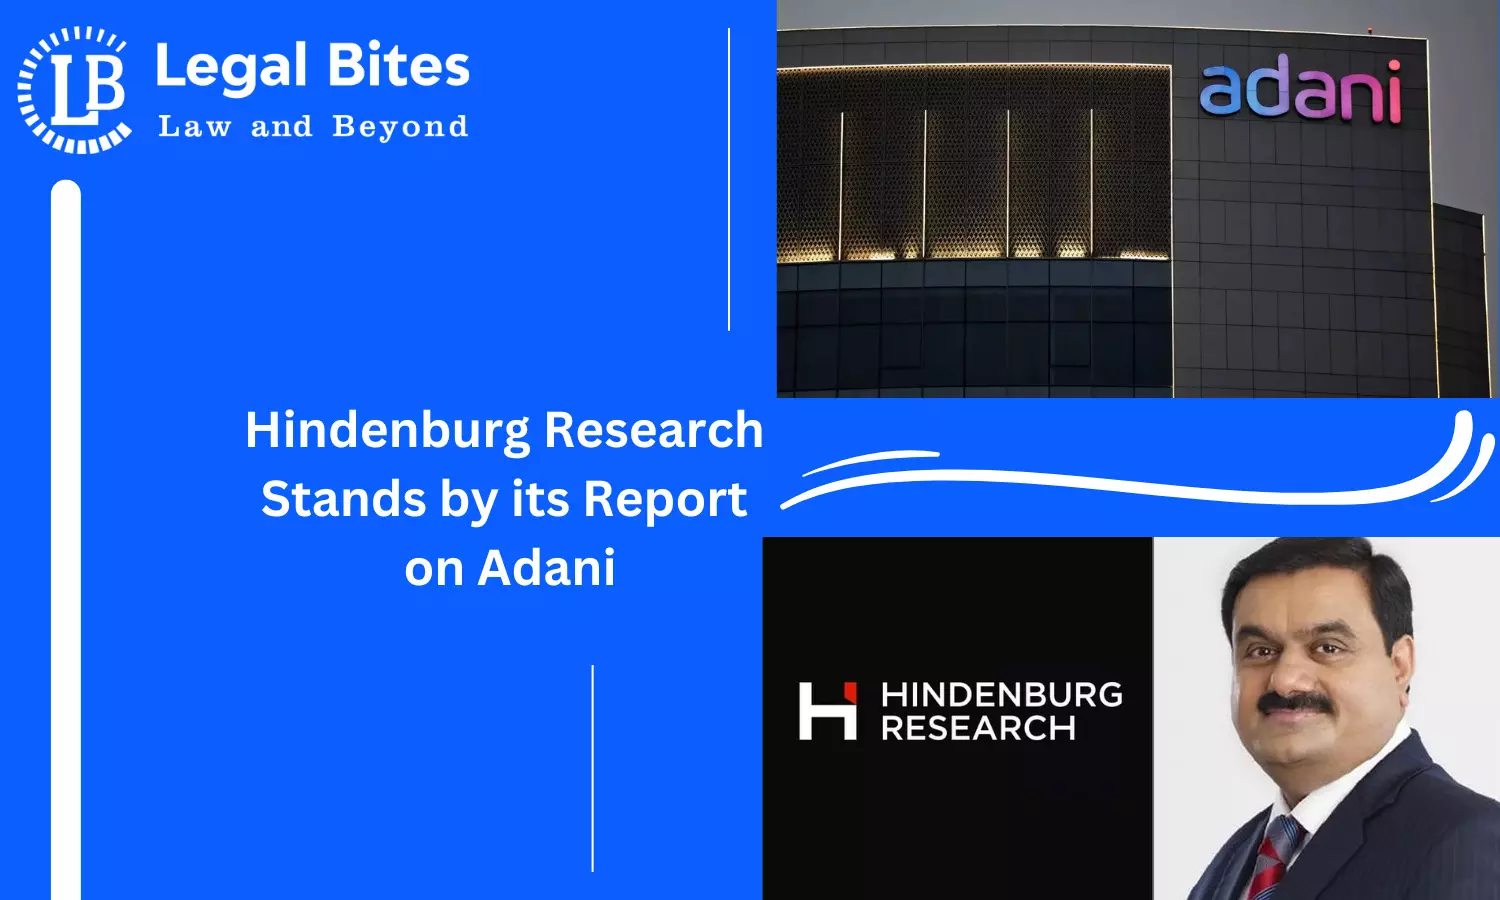 Hindenburg Research Stands by its Report on Adani